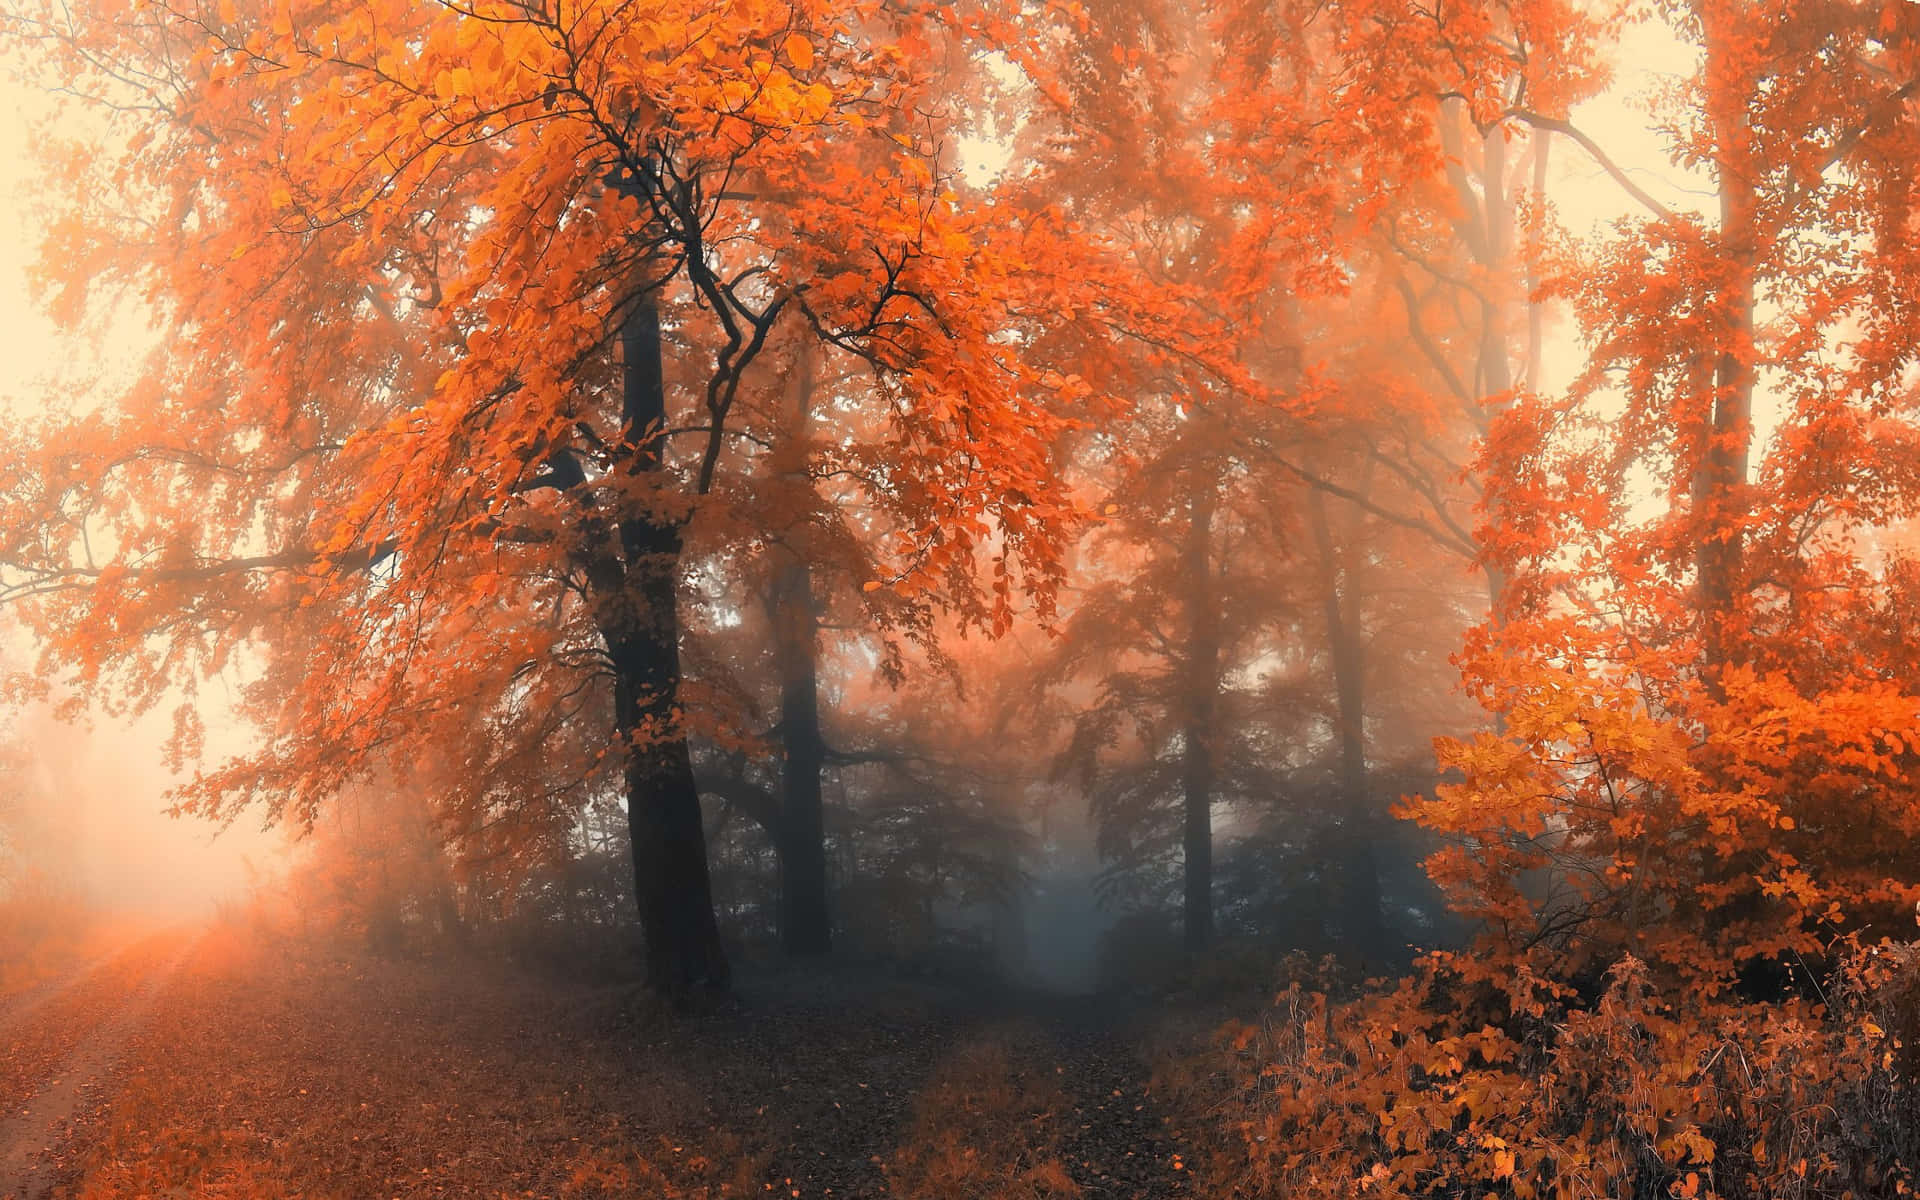 Feel the warmth of fall with this breathtaking aesthetic scene!